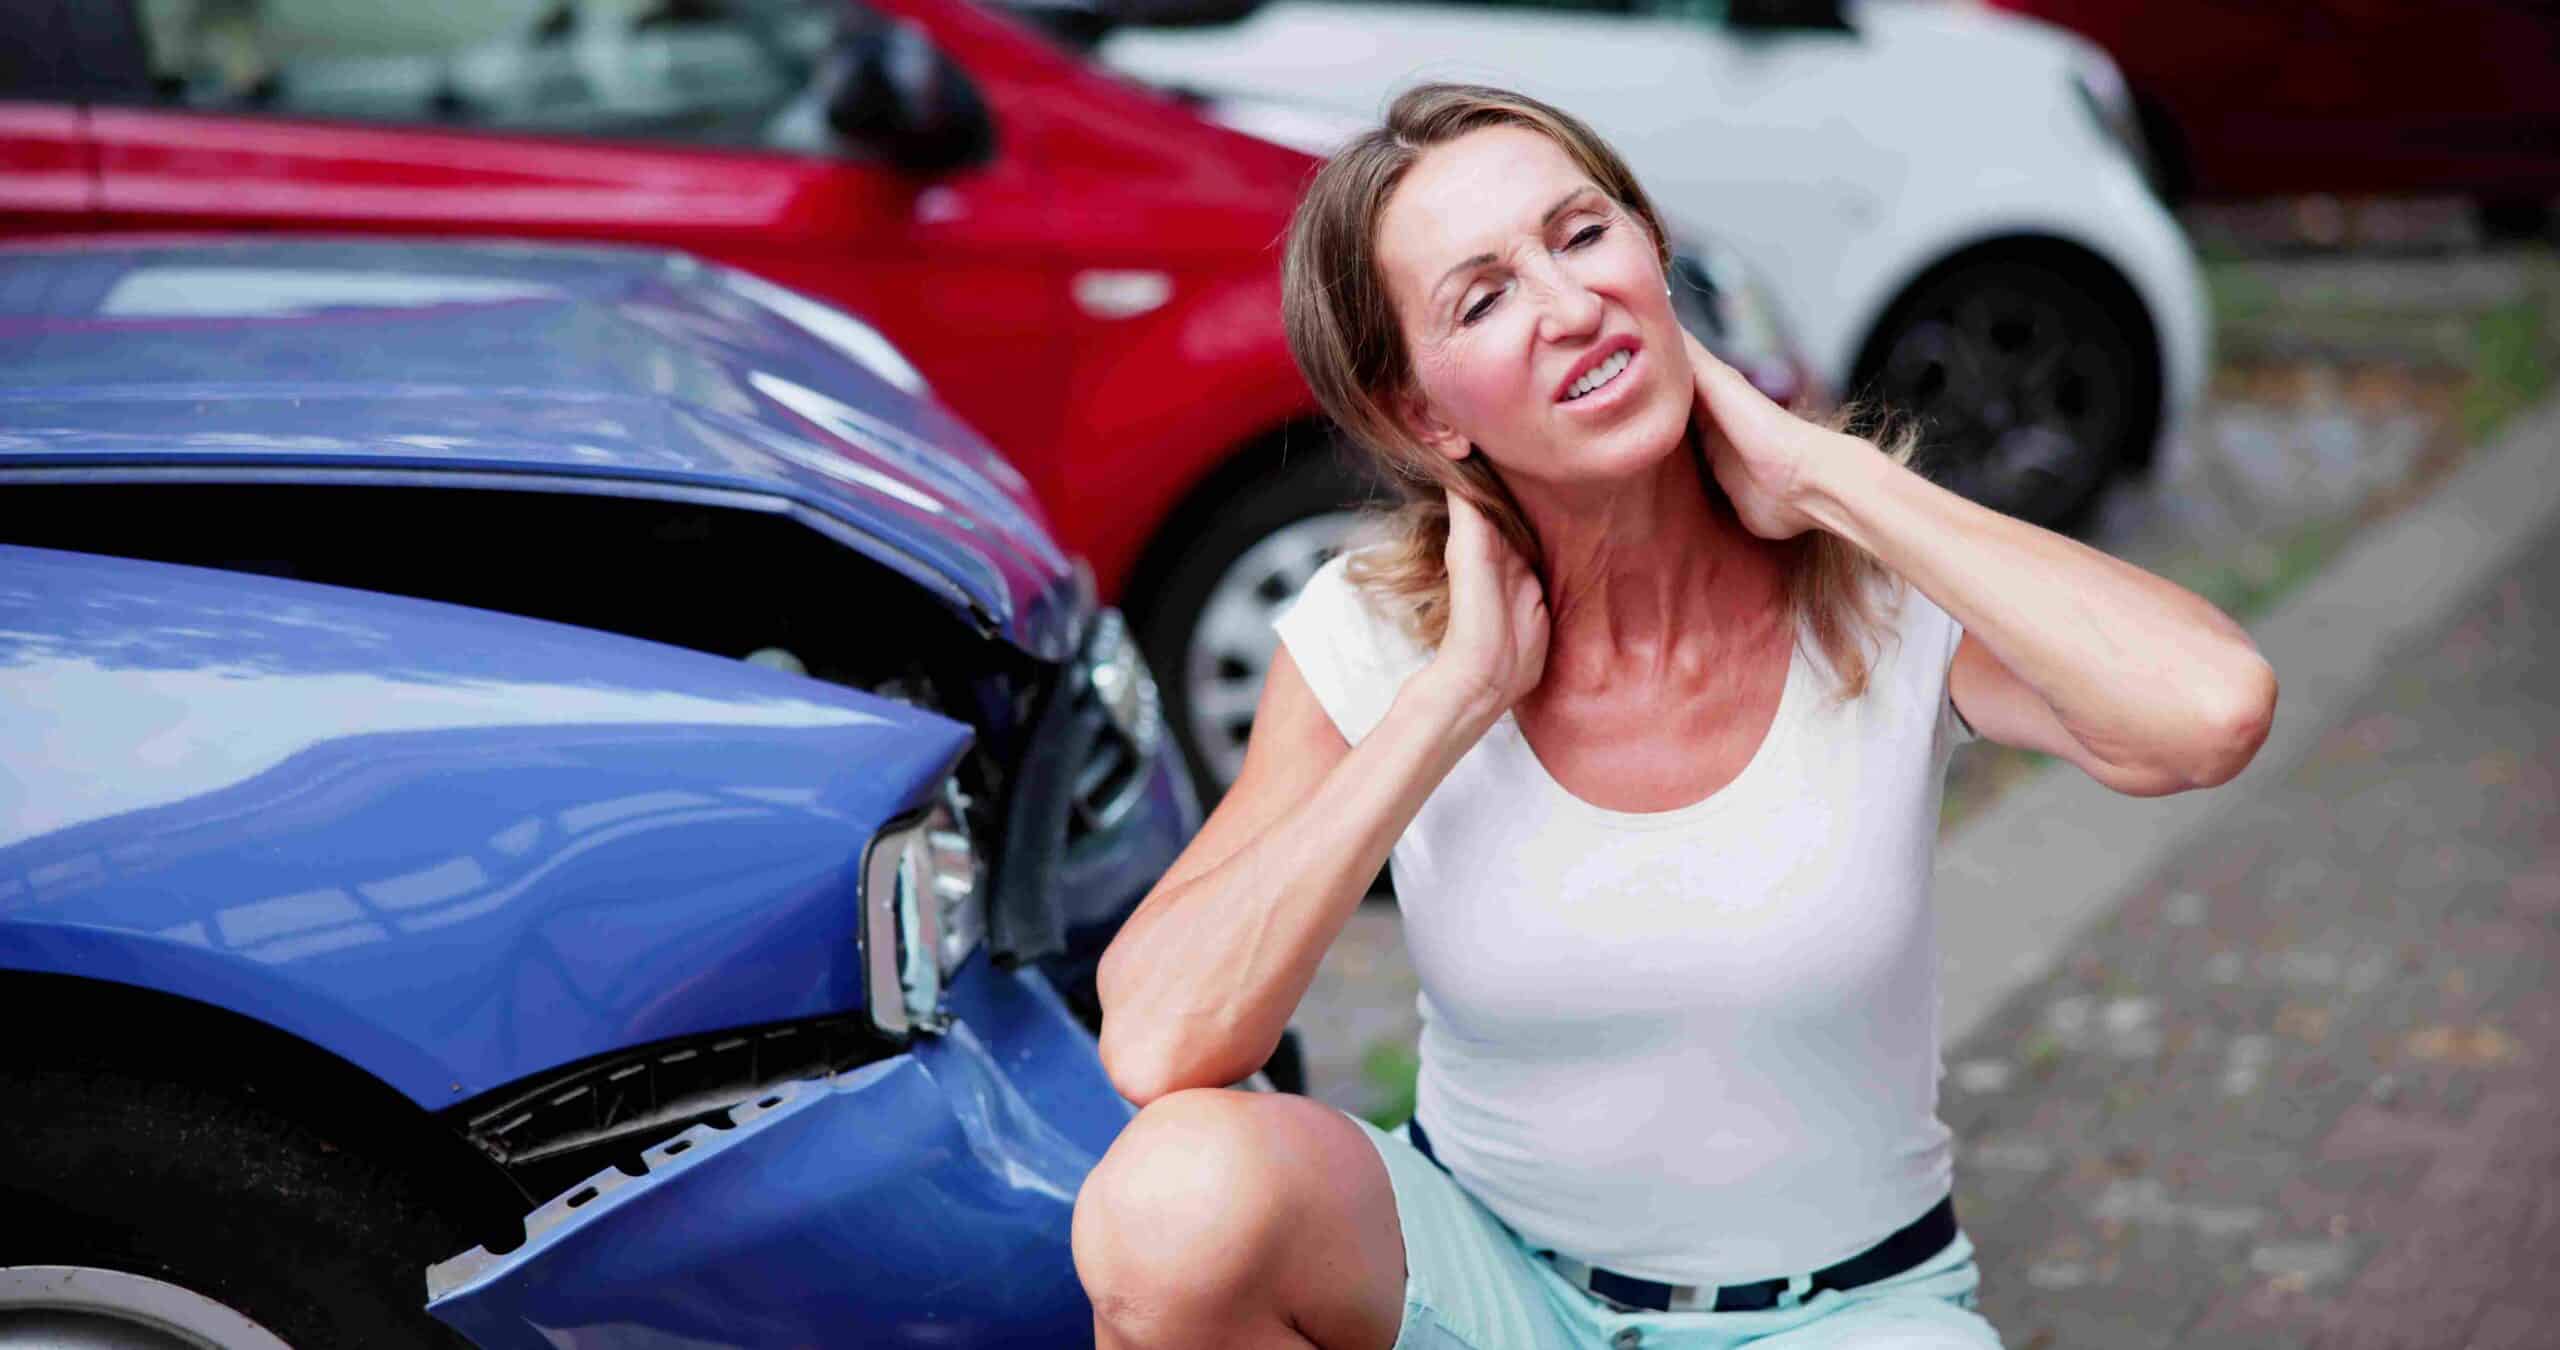 Common Soft Tissue Injuries Seen in Texas Auto Accidents